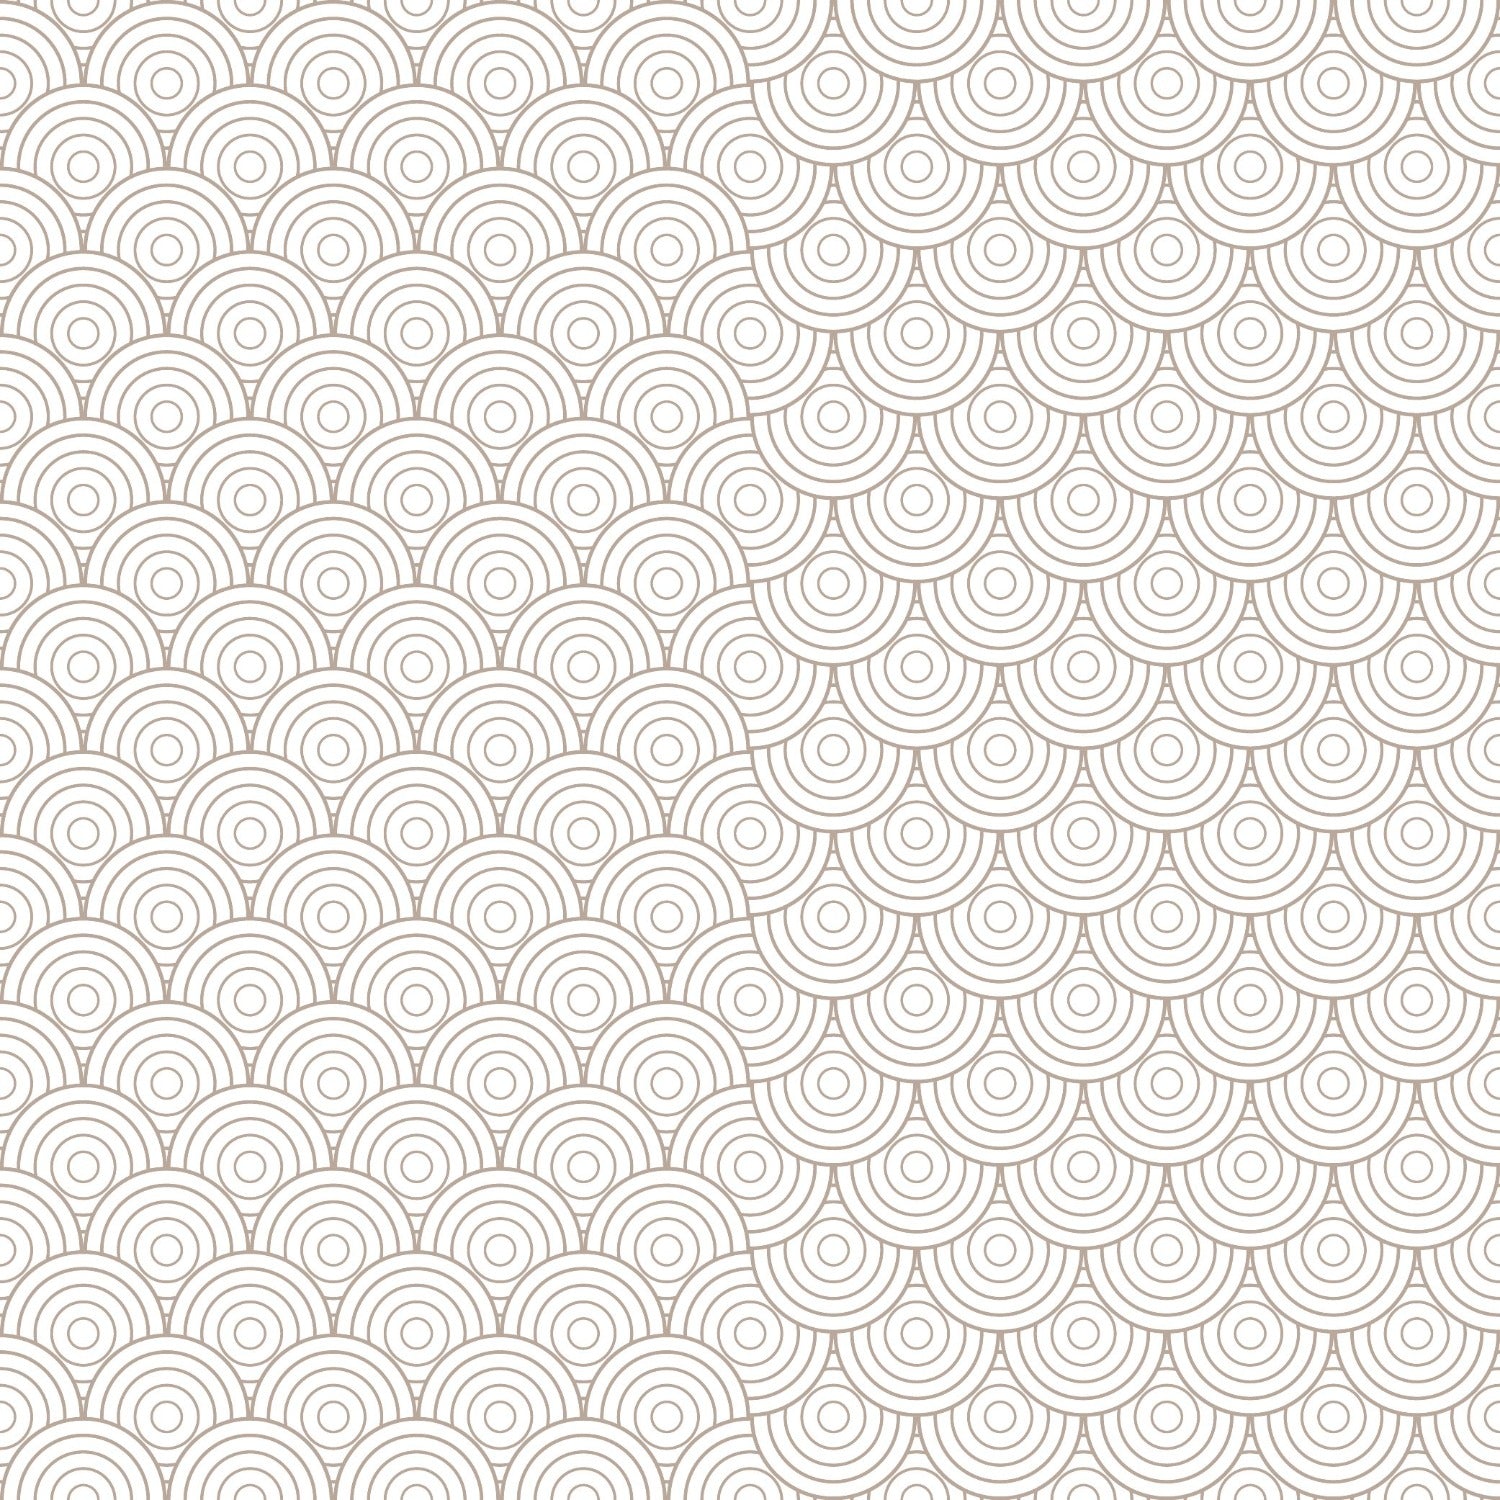 The seamless pattern of the Geometric Japanese Wallpaper is showcased, with its elegant array of overlapping circles in a soothing beige tone against a clean white background. The design brings a Zen-like quality and a touch of Japanese-inspired artistry to interior spaces.